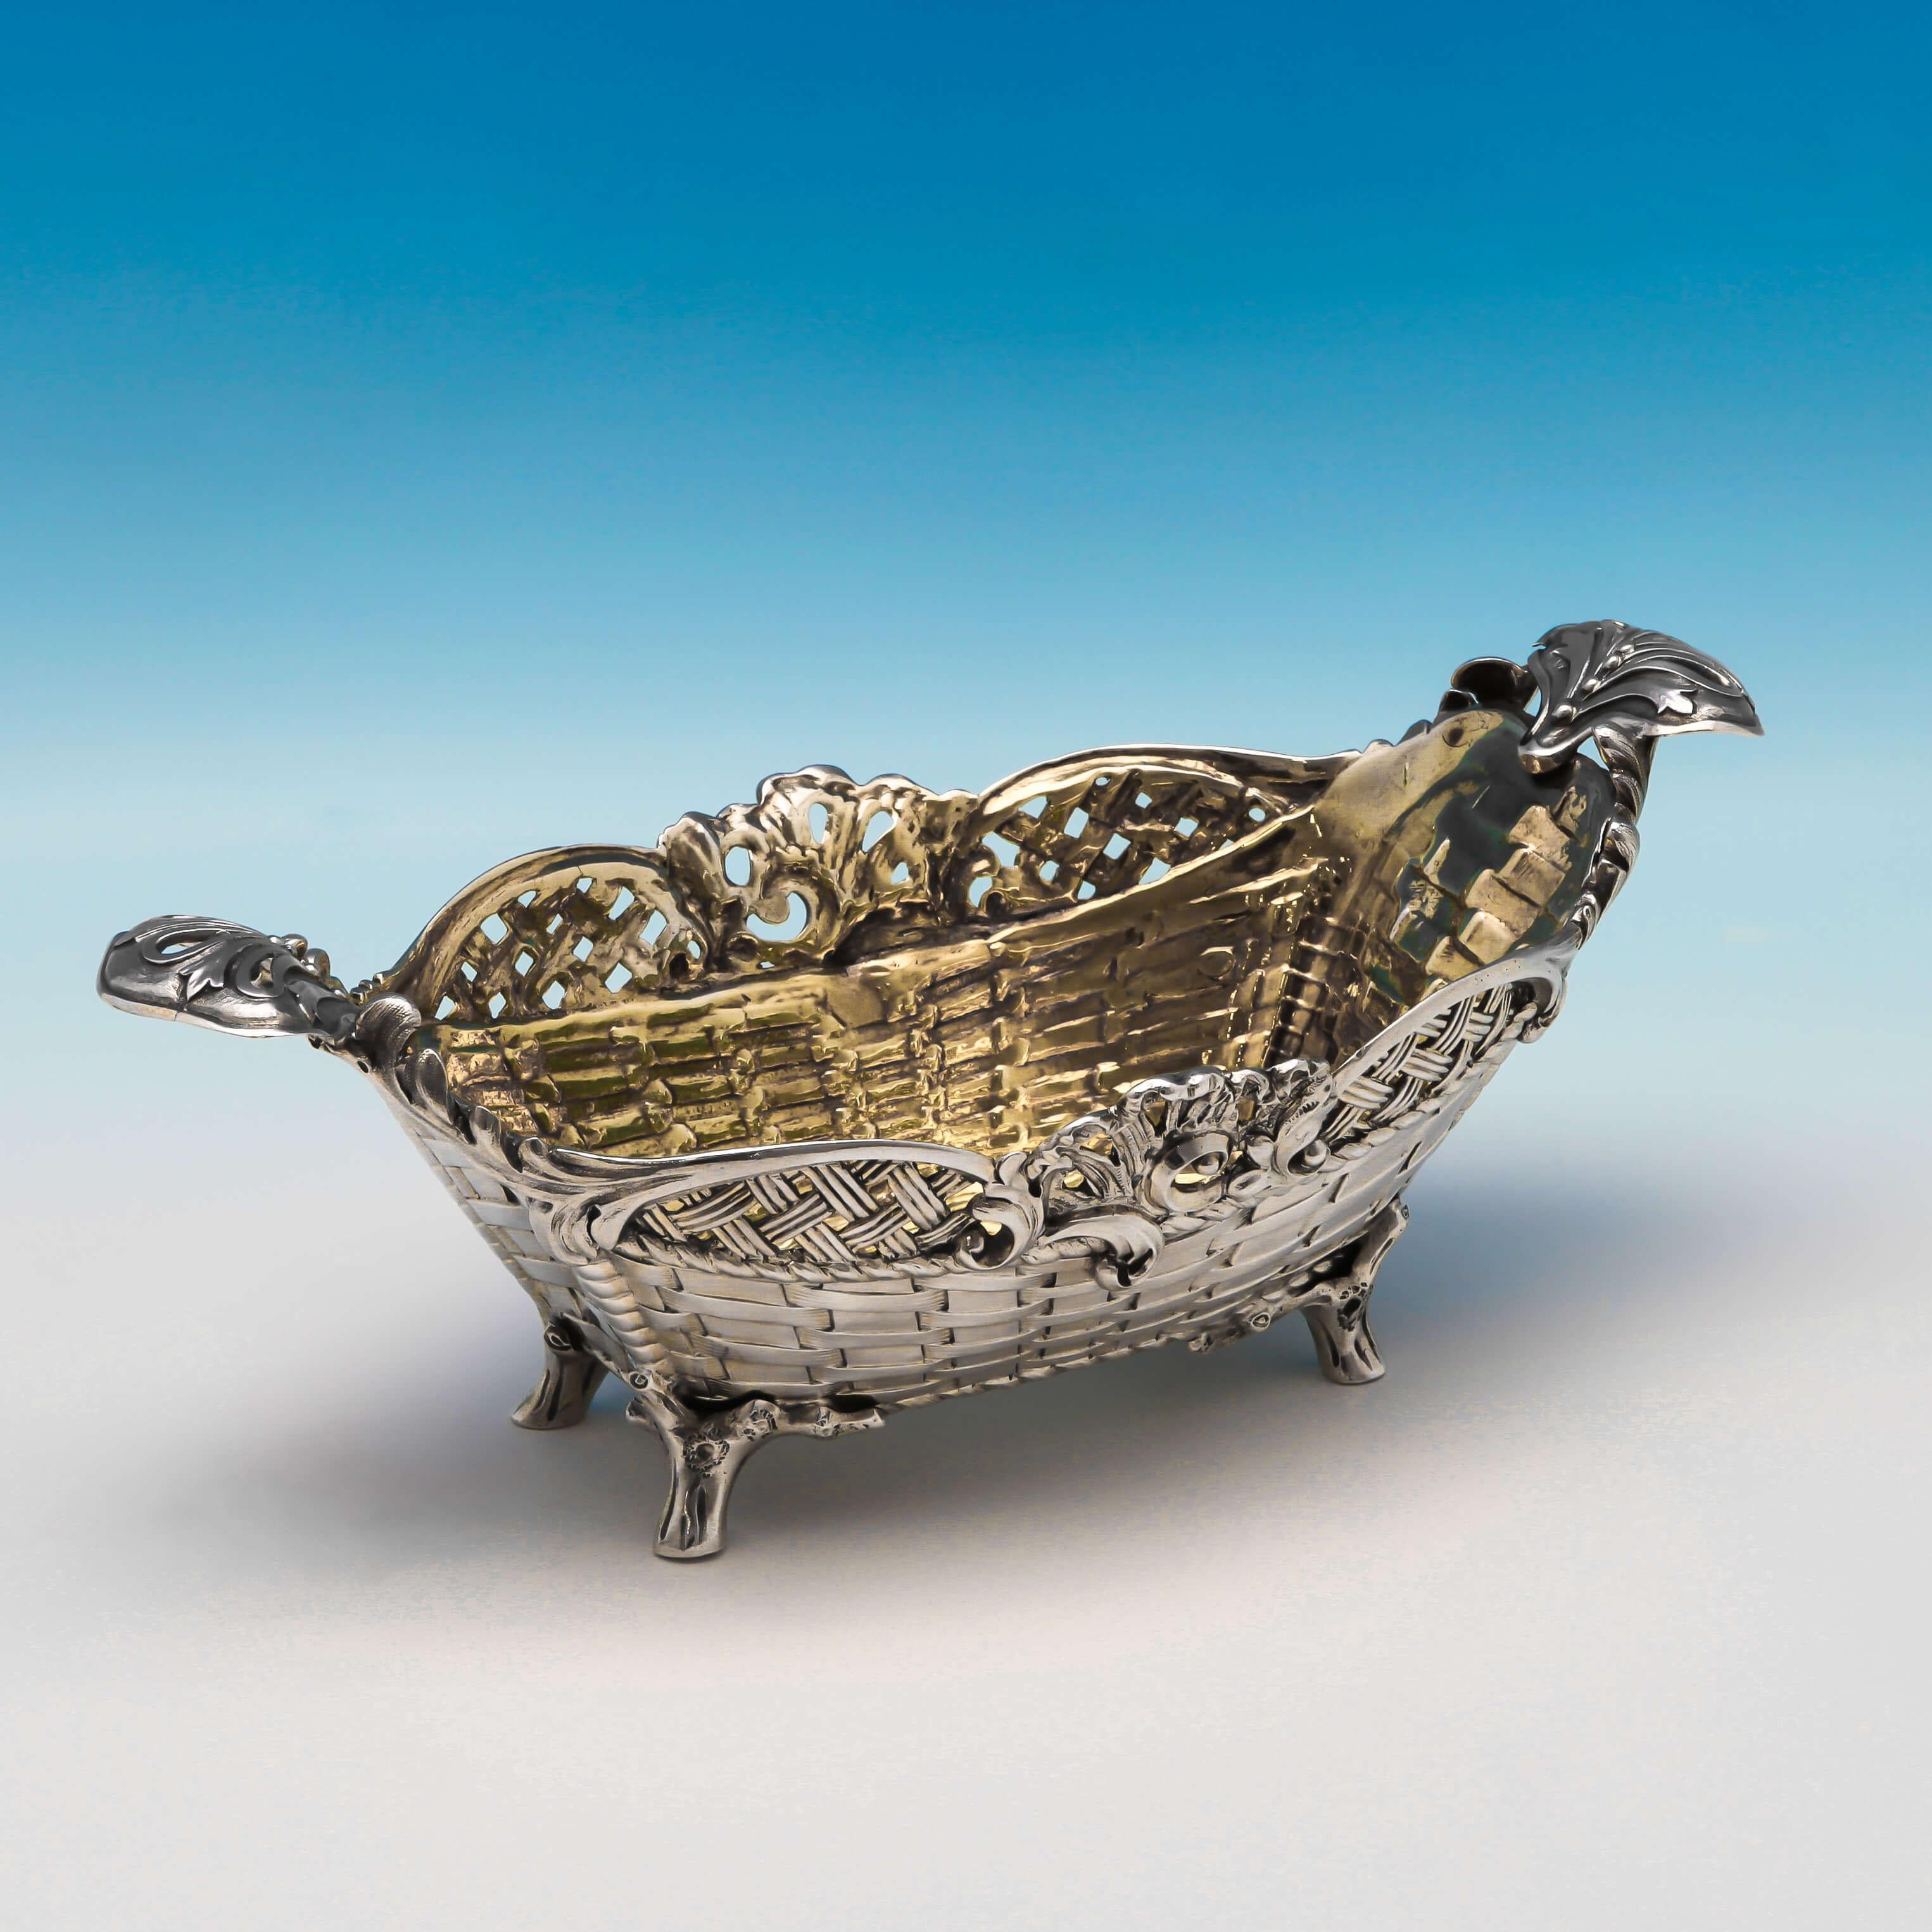 Hallmarked in London in 1880 by Stephen Smith, this attractive, Victorian,antique, sterling silver dish, has pierced lattice work and basket weave decoration, cast shell and scroll detailing, naturalistic feet and and a gilt interior. The dish